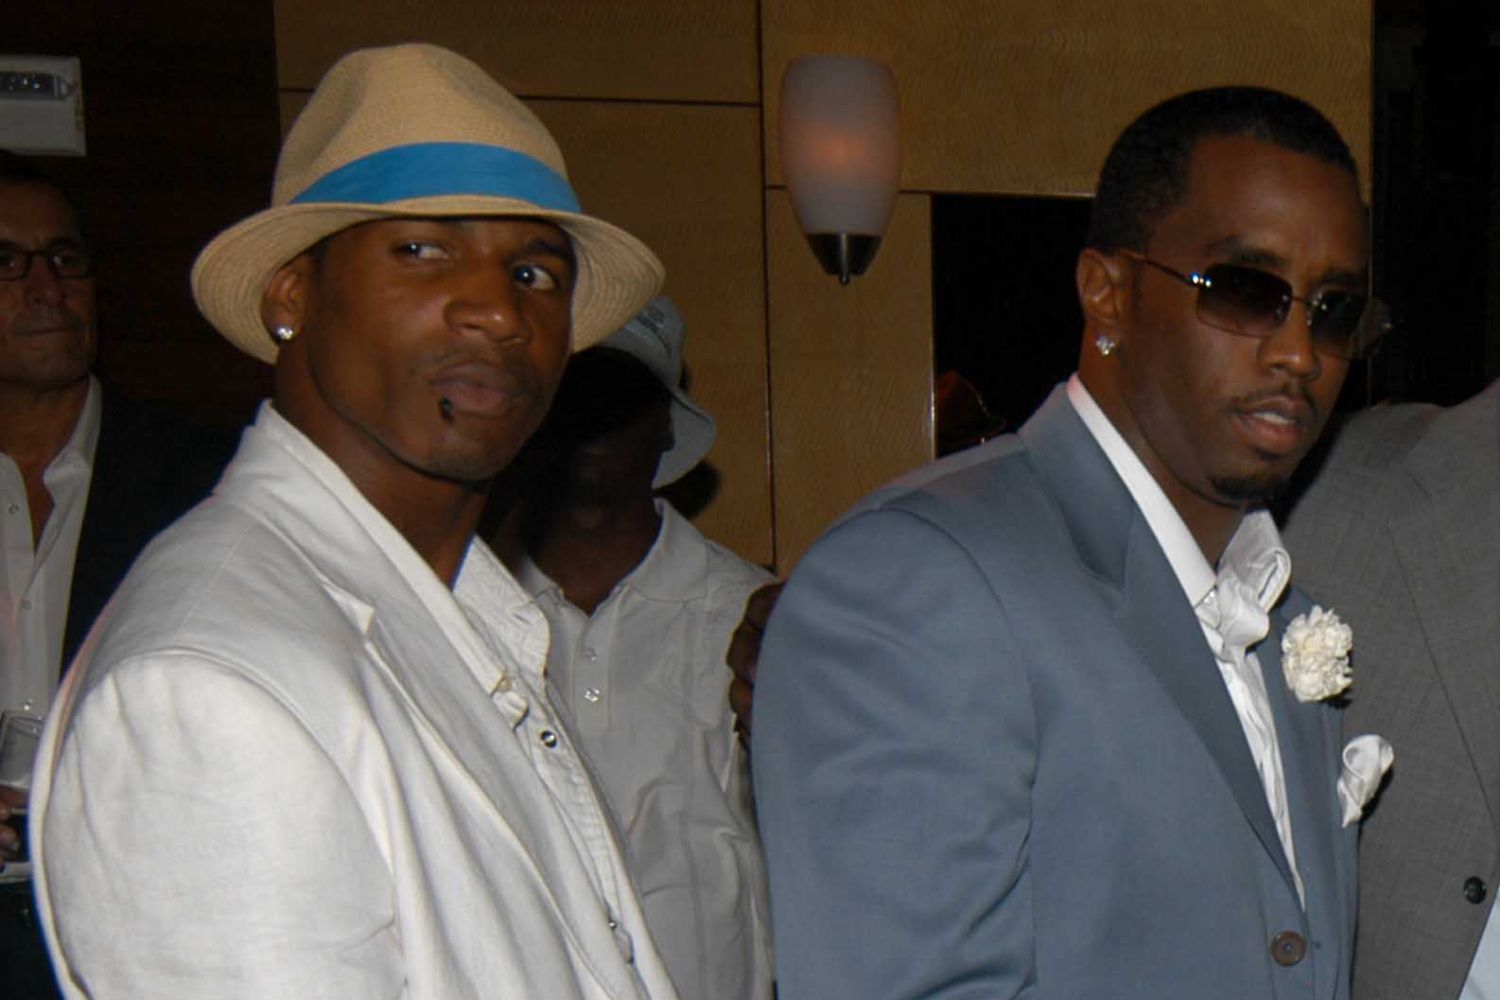 Stevie J Says He Was Present When Federal Agents Busted Into Diddy’s Miami Home With “Excessive Force”